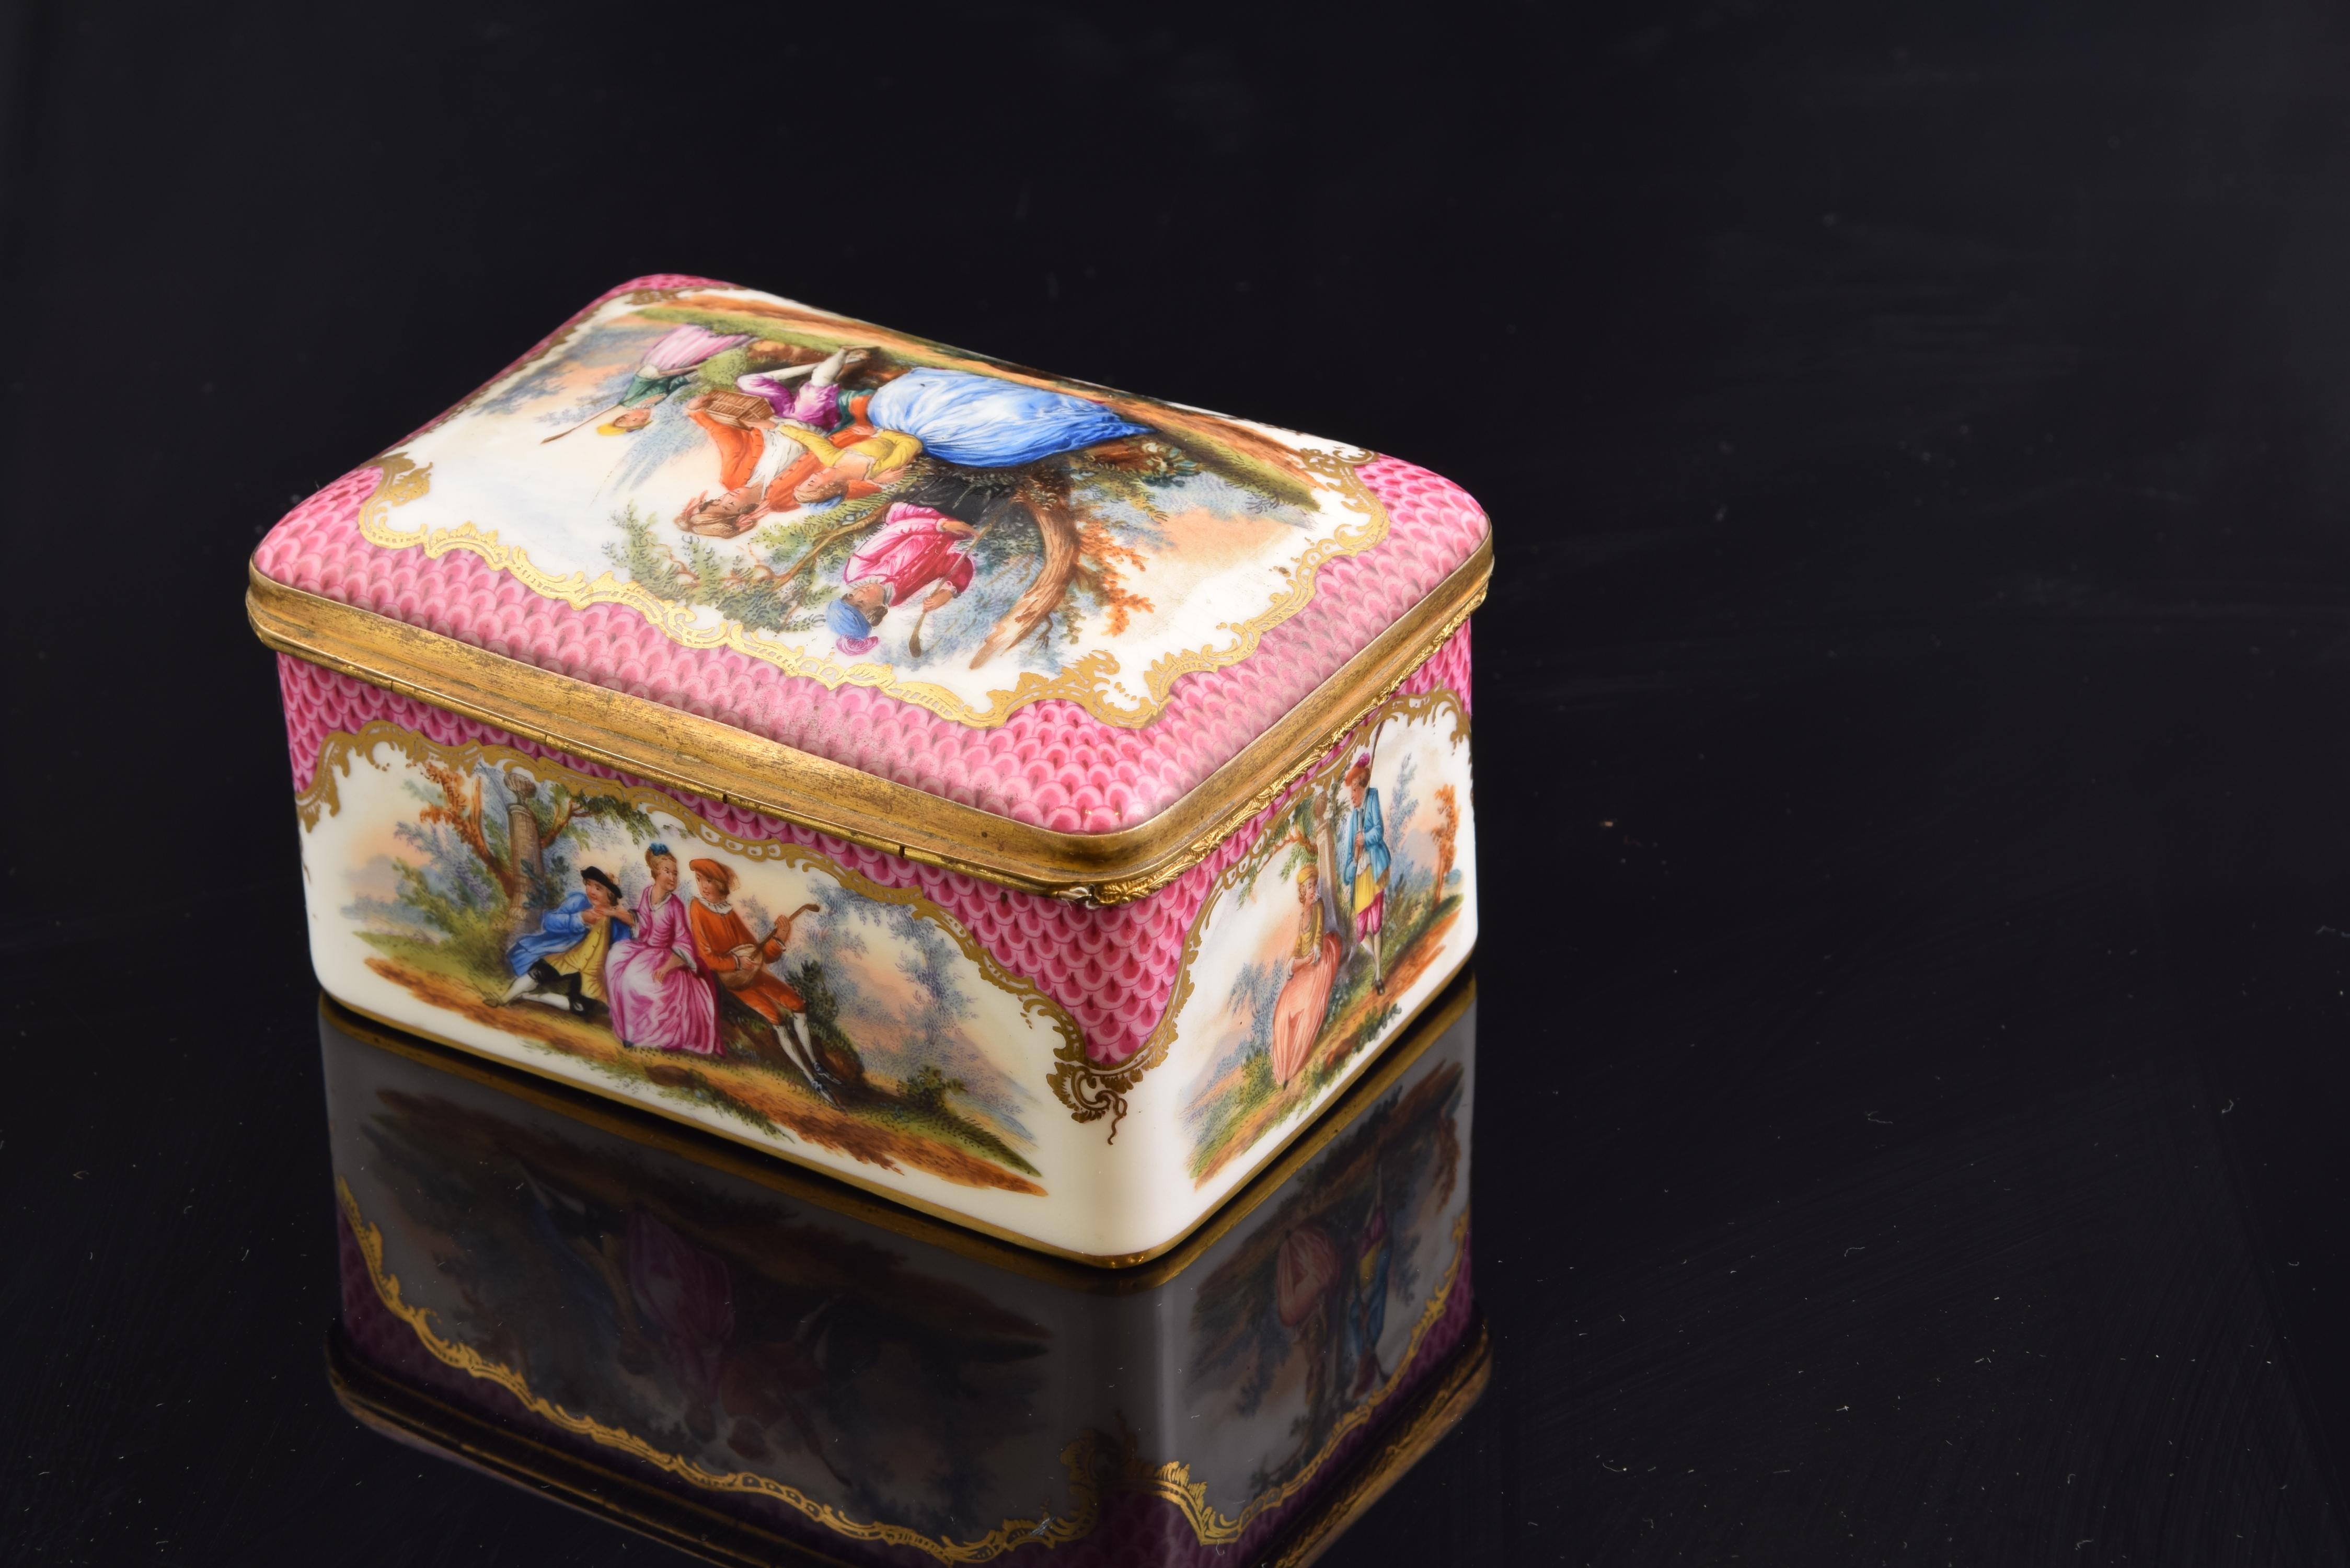 Potschappel-Dresden, Germany, 19th century.
With brand on the base.
Rectangular box with a slightly curved lid made of enamelled porcelain with golden metal finishes and hinges that is decorated, on the outside, of figurative scenes of couples in